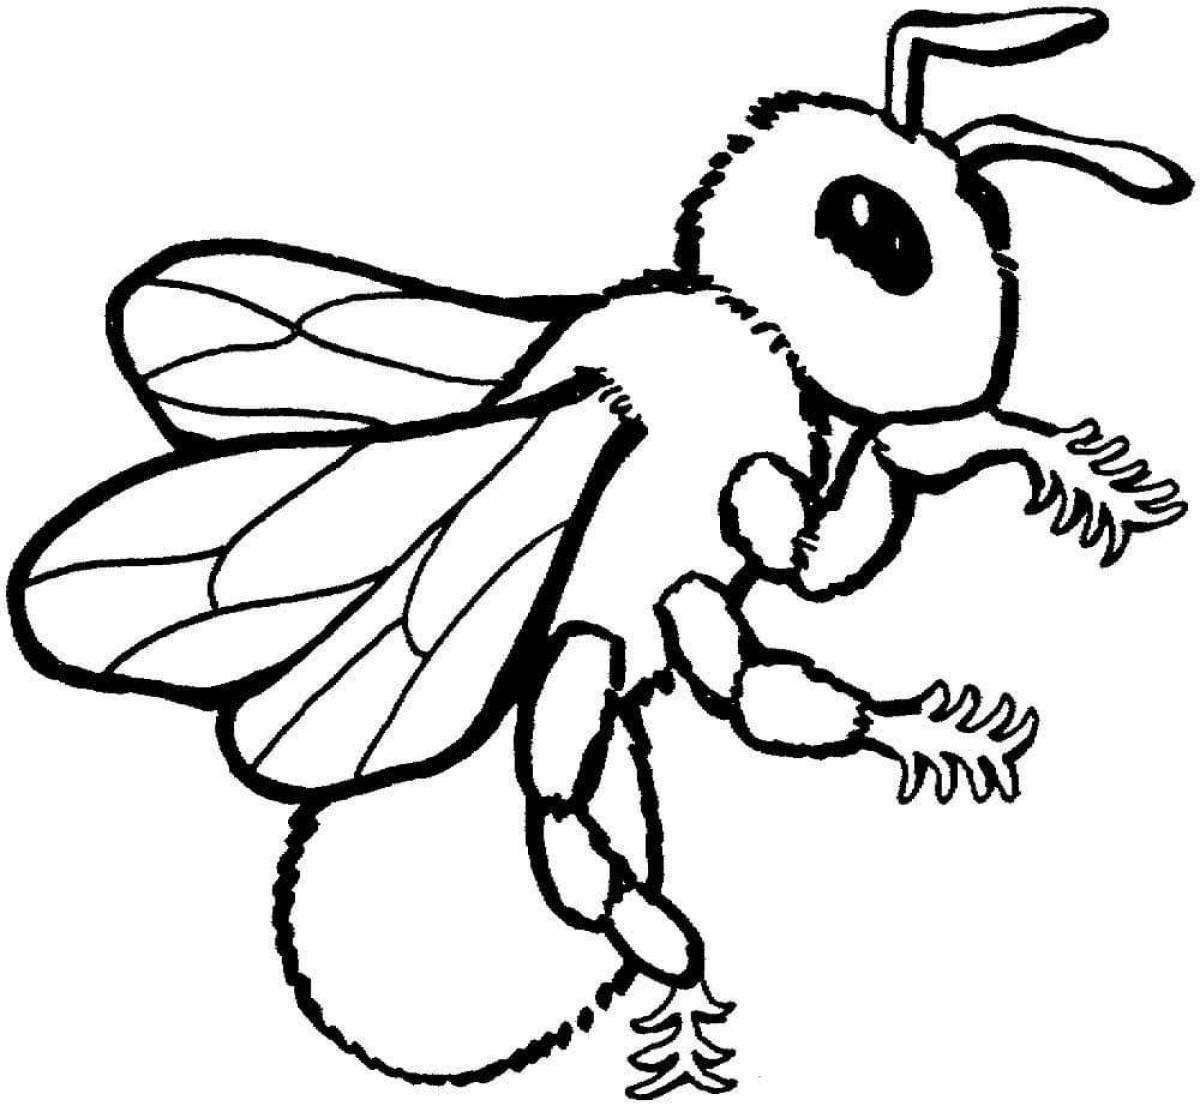 Coloring book busy bee